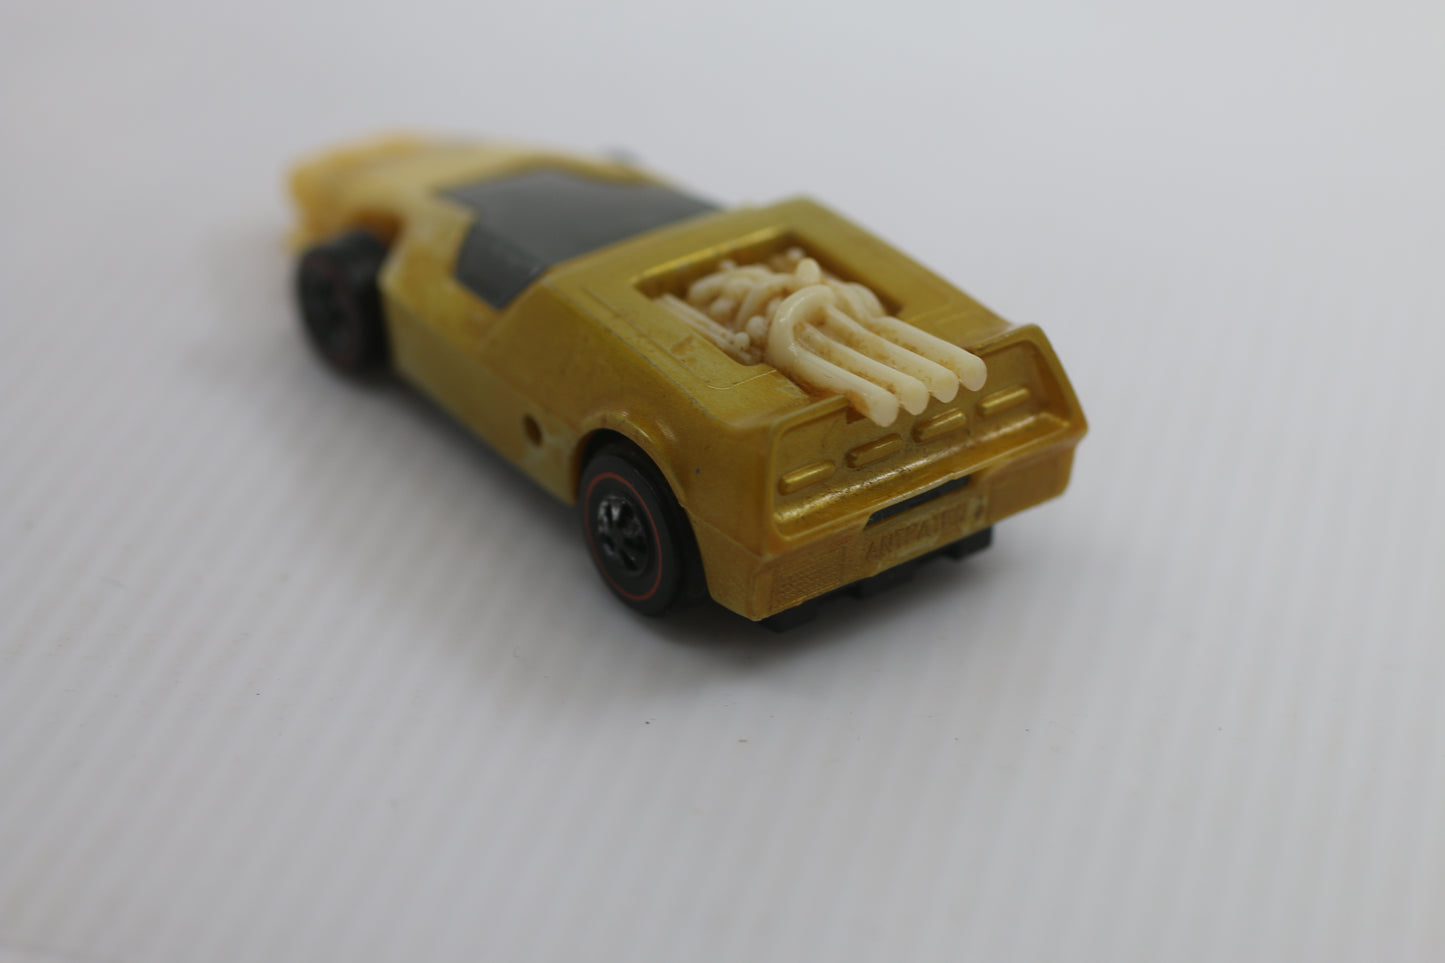 Mattel Hot Wheels Red Line Anteater Sizzler Toy Car, Yellow, 1969